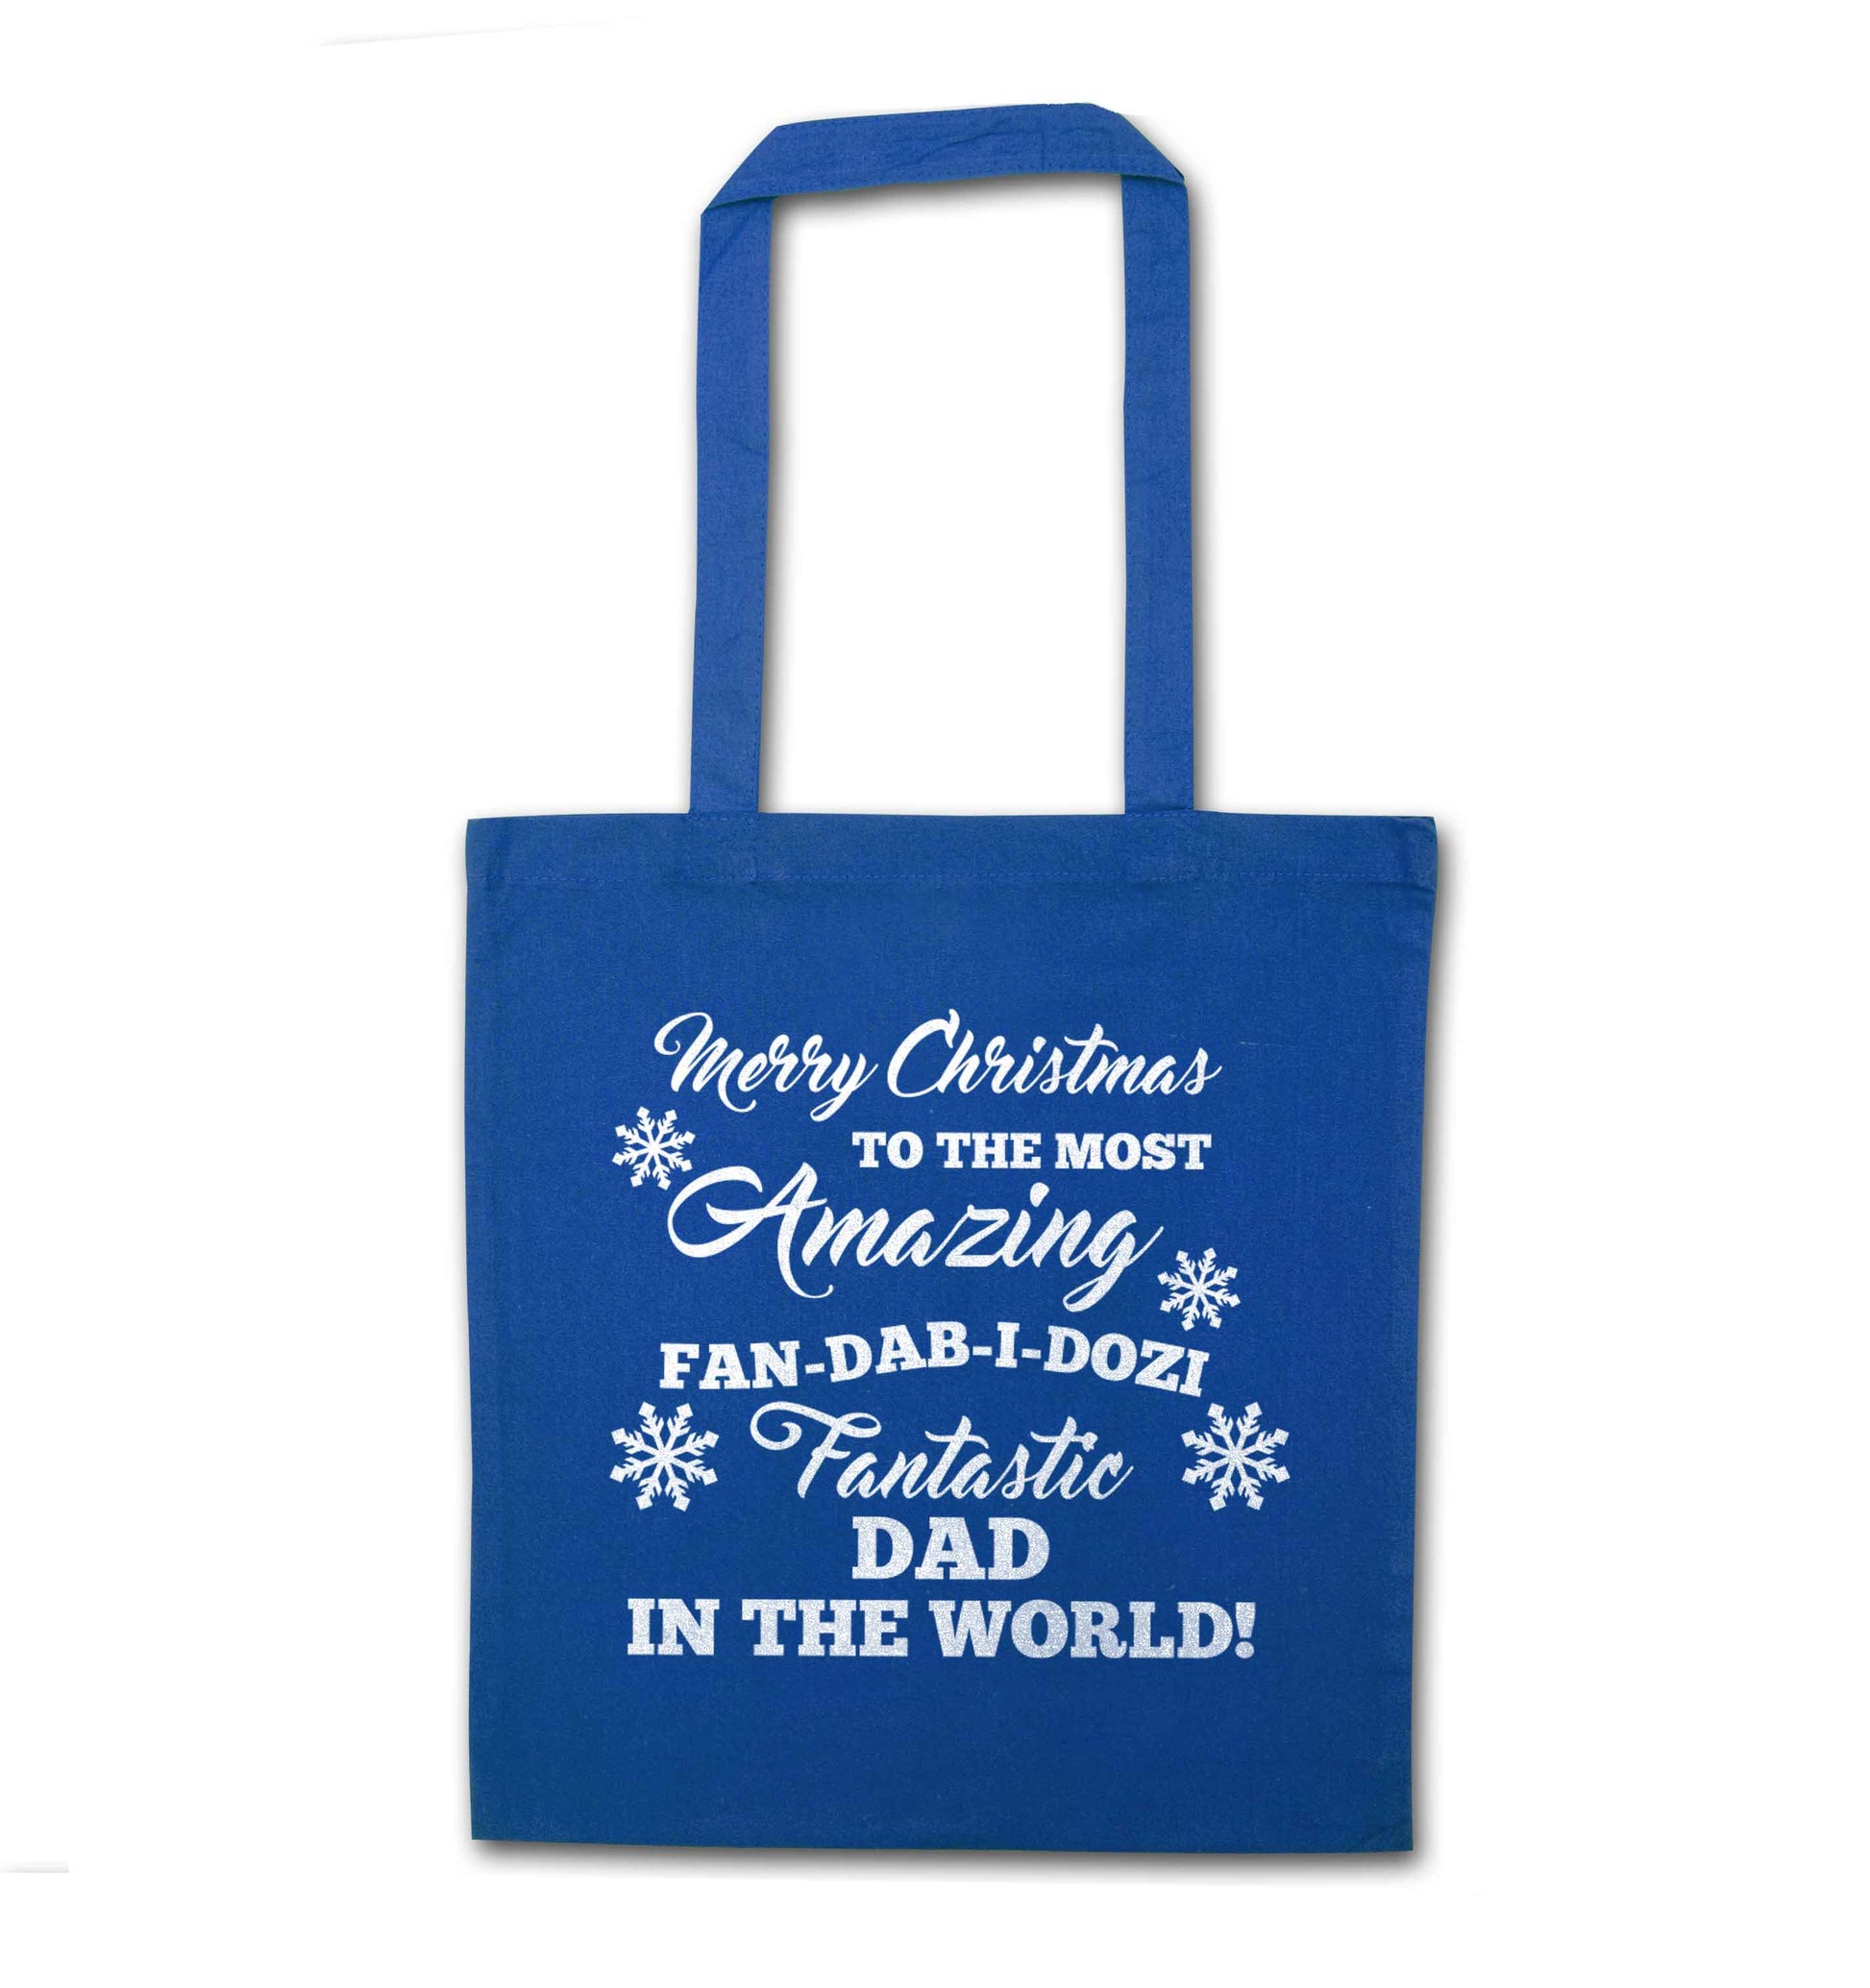 Merry Christmas to the most amazing fan-dab-i-dozi fantasic Dad in the world blue tote bag